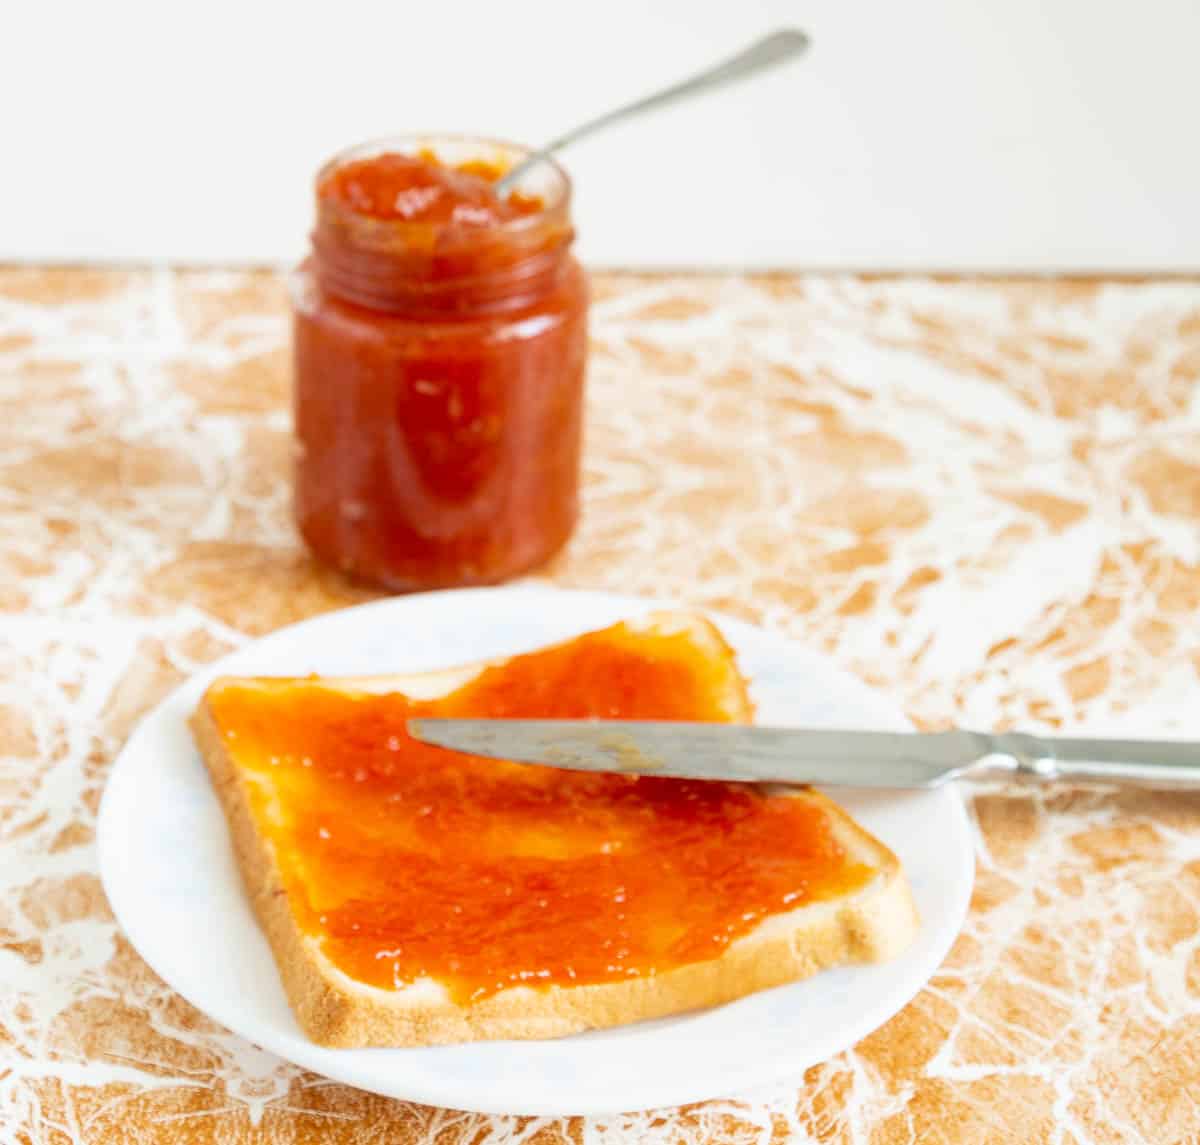 A slice of bread with apricot peach jam on a plate with a knife, and a jar of jam in the background.